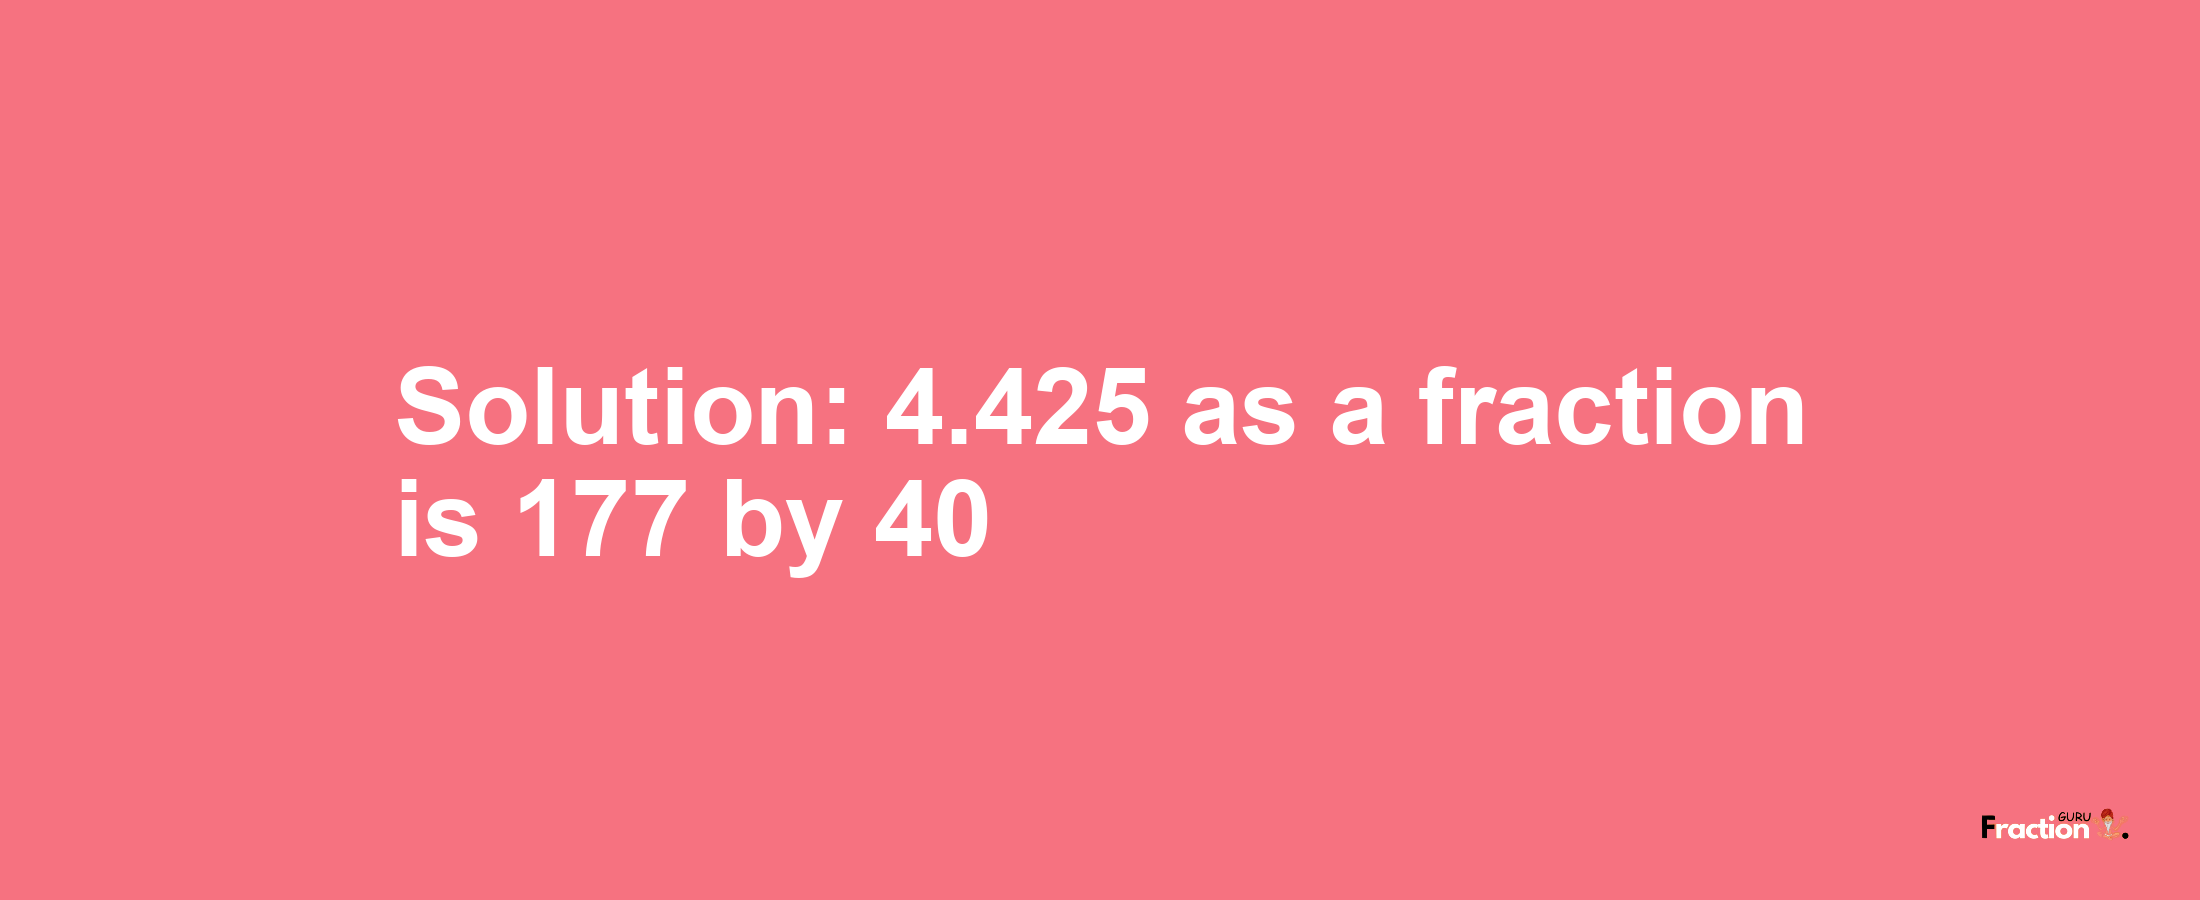 Solution:4.425 as a fraction is 177/40